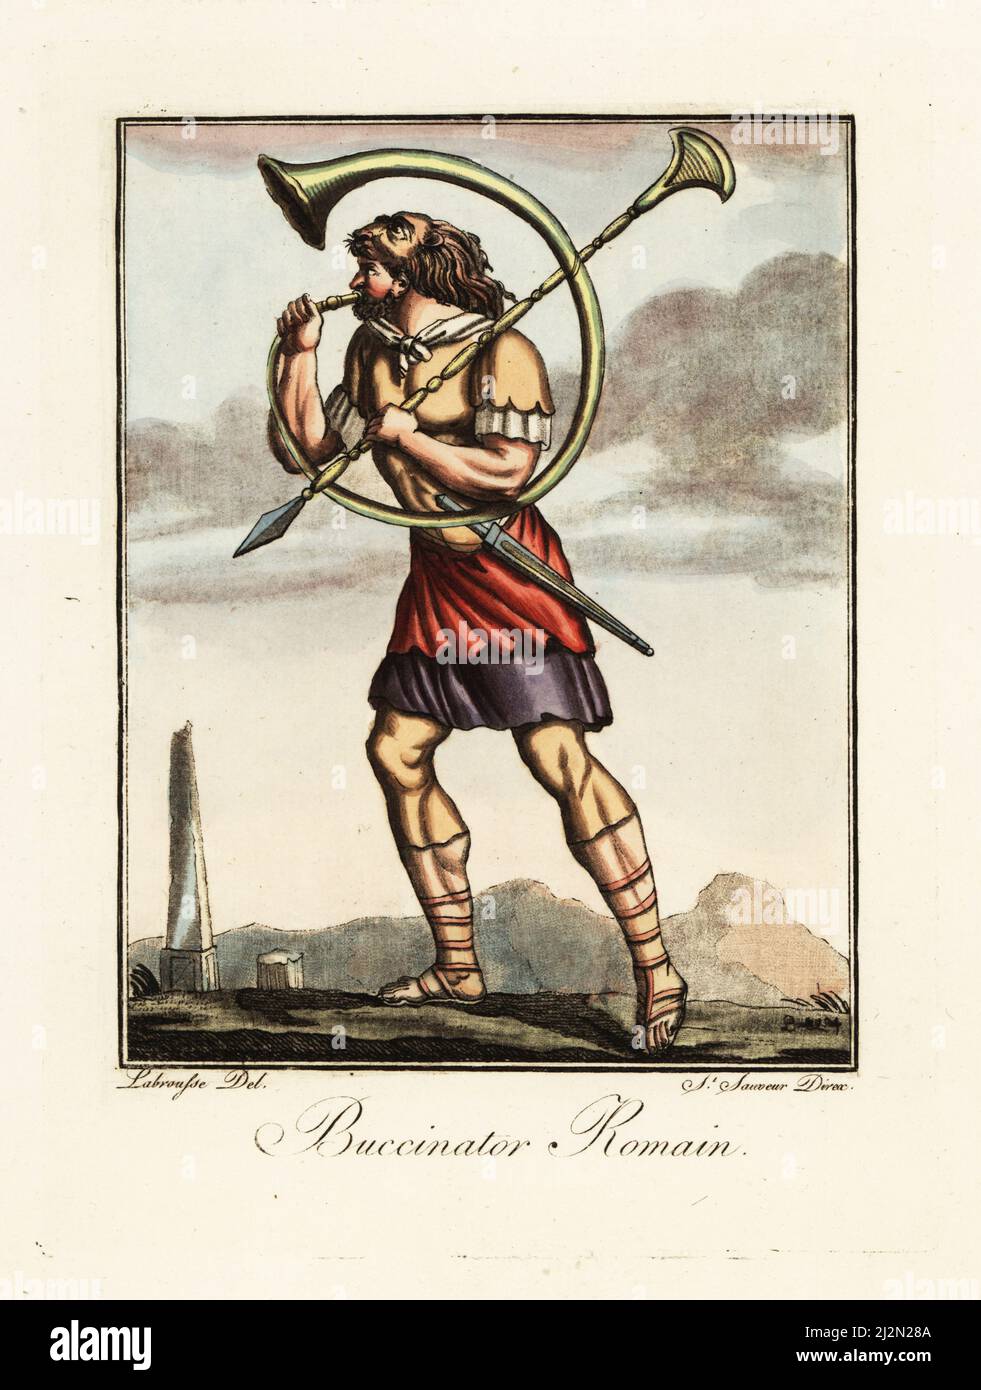 Buccinator or hornplayer in the Roman army, ancient Rome. He wears a lion-skin headdress, tunic, sagulum gregale or short trousers and sandals. He blows the buccina and is armed with gladius sword and pilum spear. A broken obelisk behind. Buccinator Romain. Handcoloured copperplate drawn and engraved by L. Labrousse, artist of Bordeaux, under the direction of Jacques Grasset de Saint-Sauveur from his L’antique Rome, ou description historique et pittoresque, Ancient Rome, or historical and picturesque description, Chez Deroy, Paris, 1796. Stock Photo